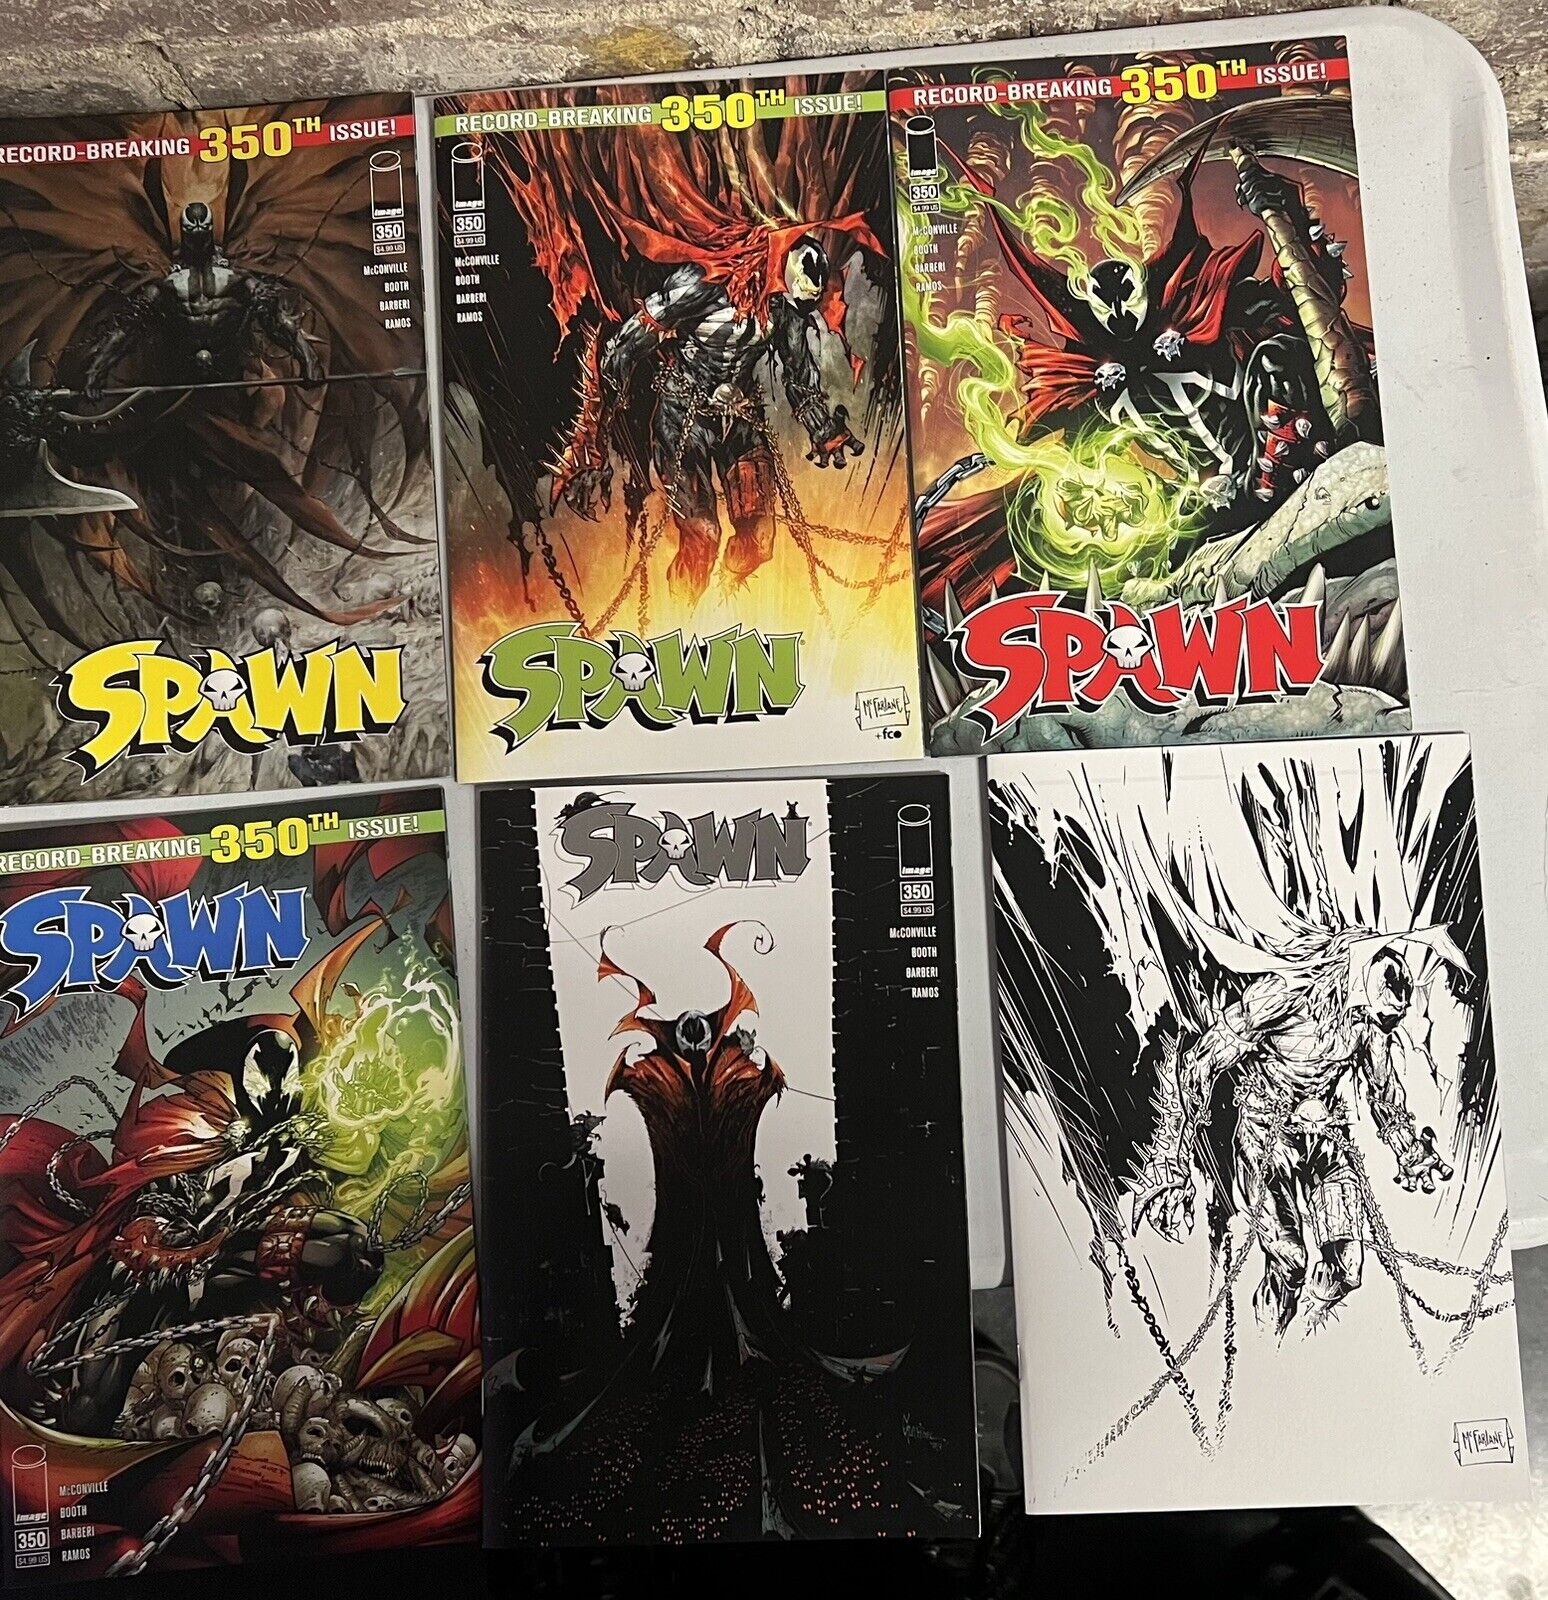 Spawn #350 Set of 6 covers - A, B, C, D, E, F